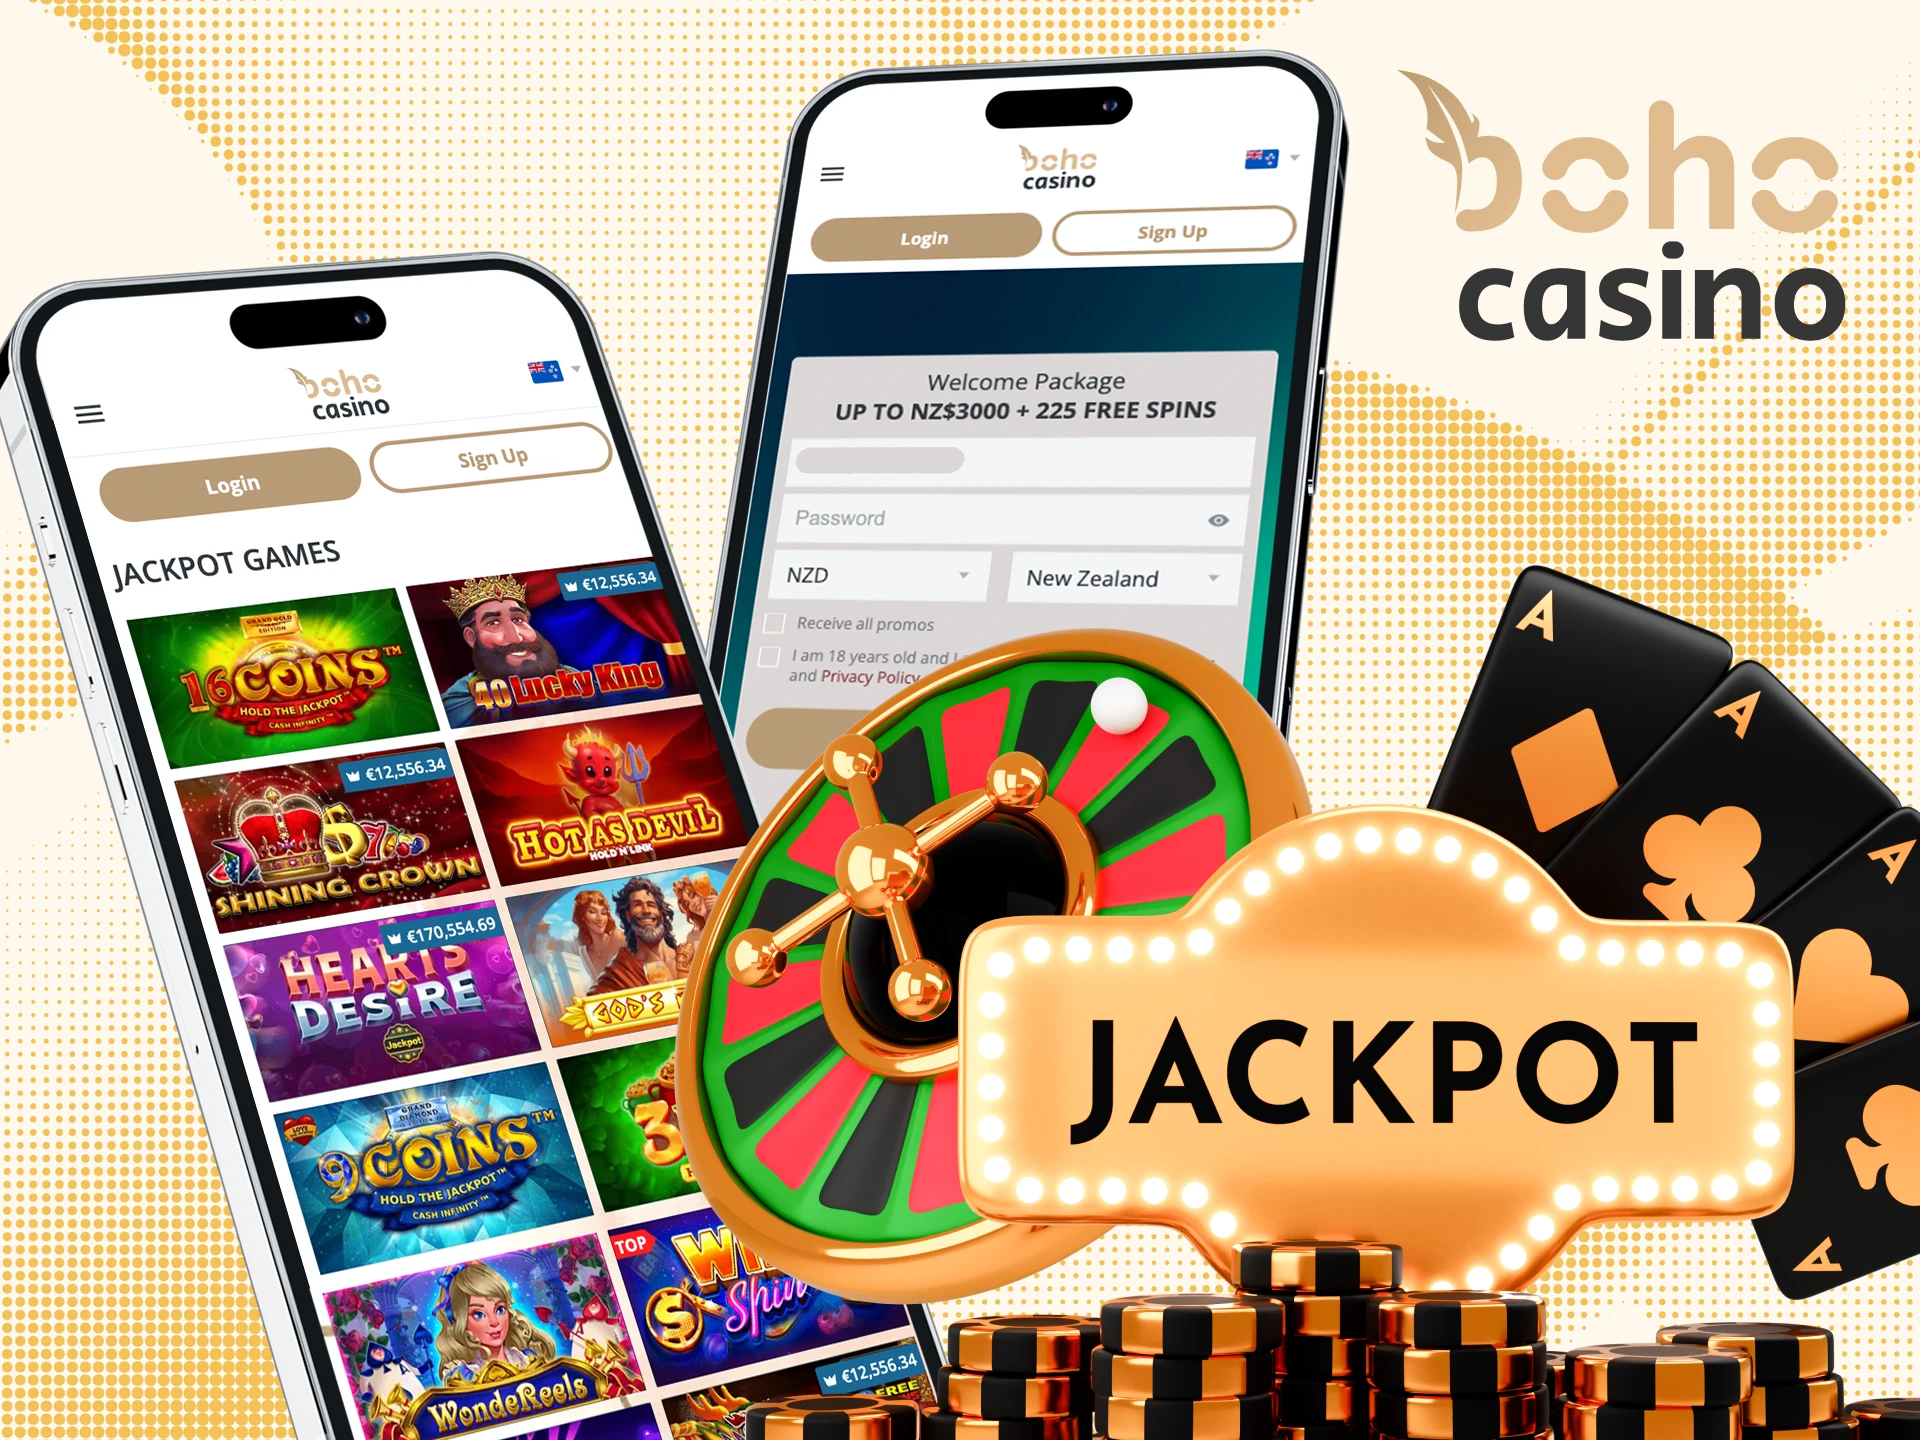 Visit the official website and register to start playing through Boho Casino mobile app.